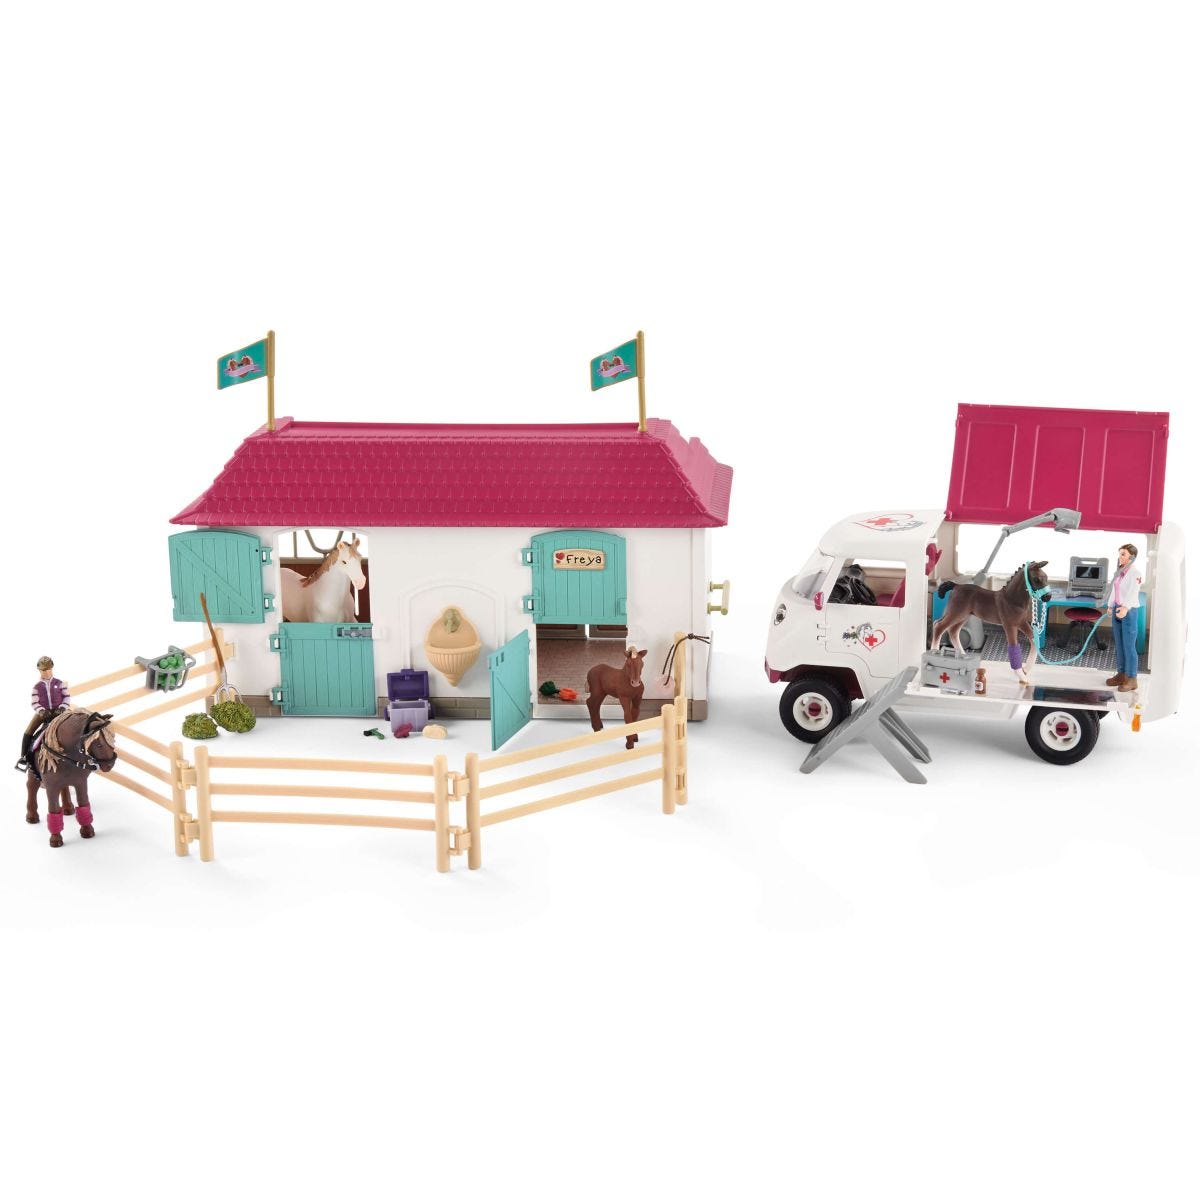 Schleich Horse Club Tack Room Extension 42591